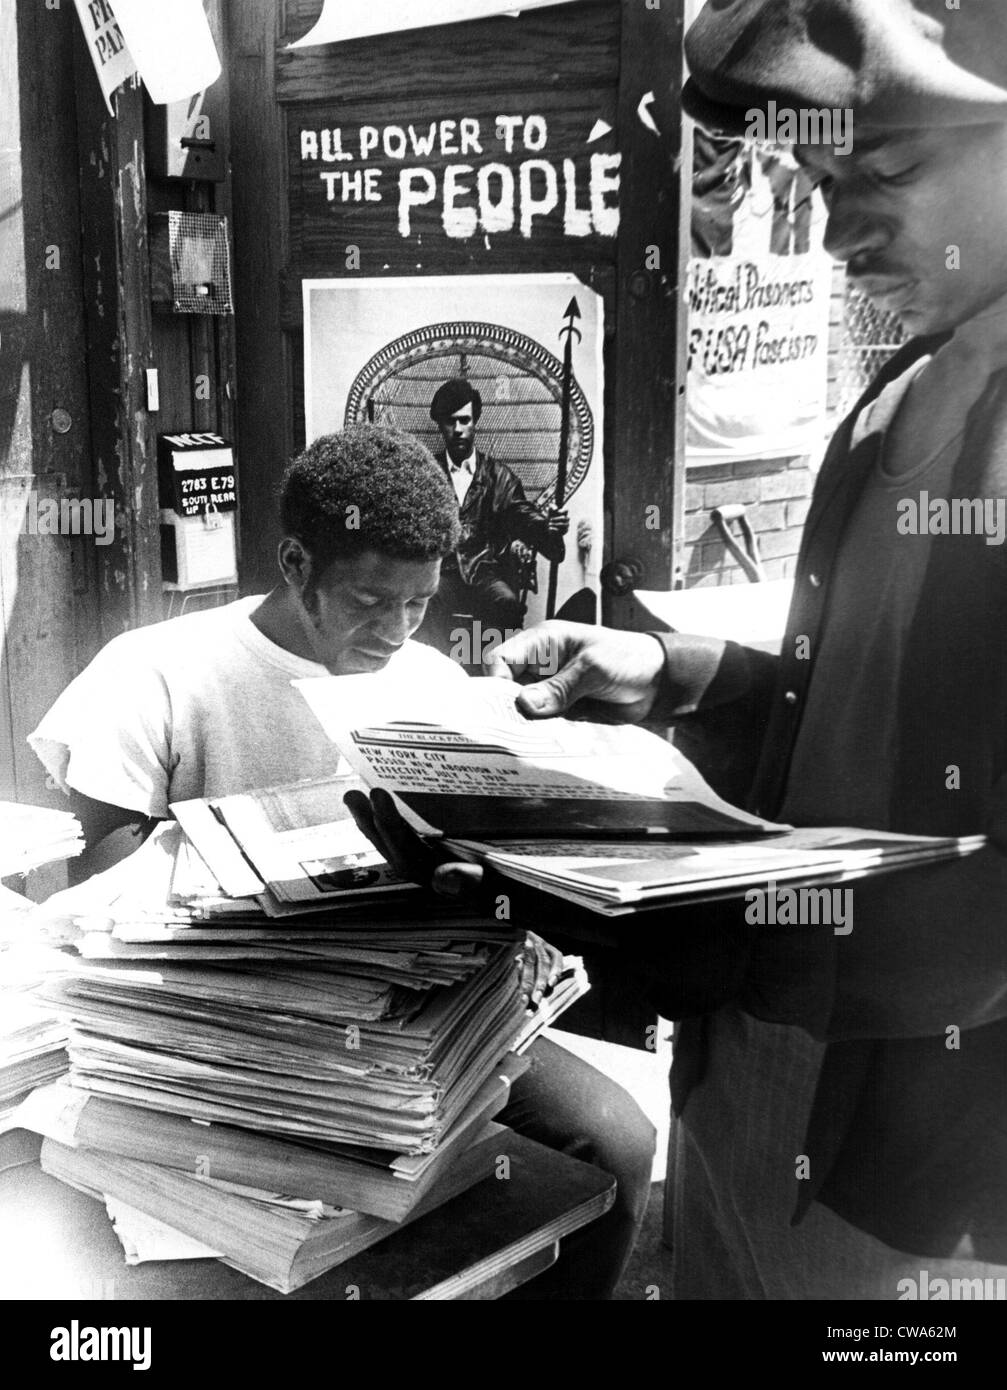 Two members of the Black Panther Party (Cleve Simpson, age 22, and David Hall, age 22) count issues of The Black Panther, July Stock Photo